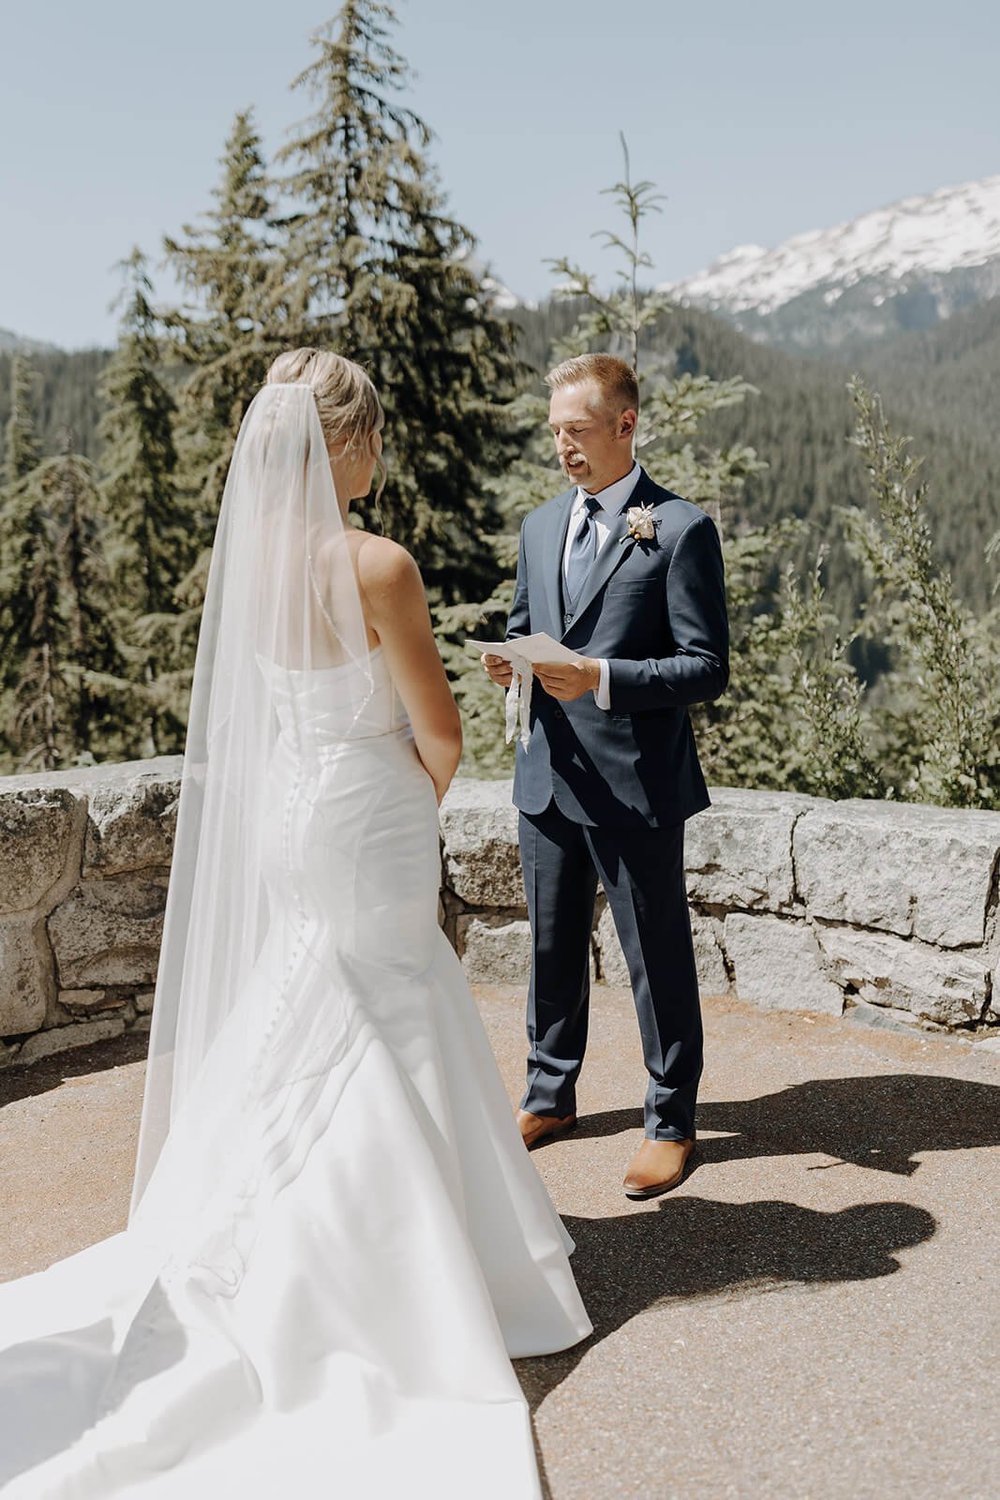 Groom reading vows to bride during outdoor wedding ceremony at Mount Rainier